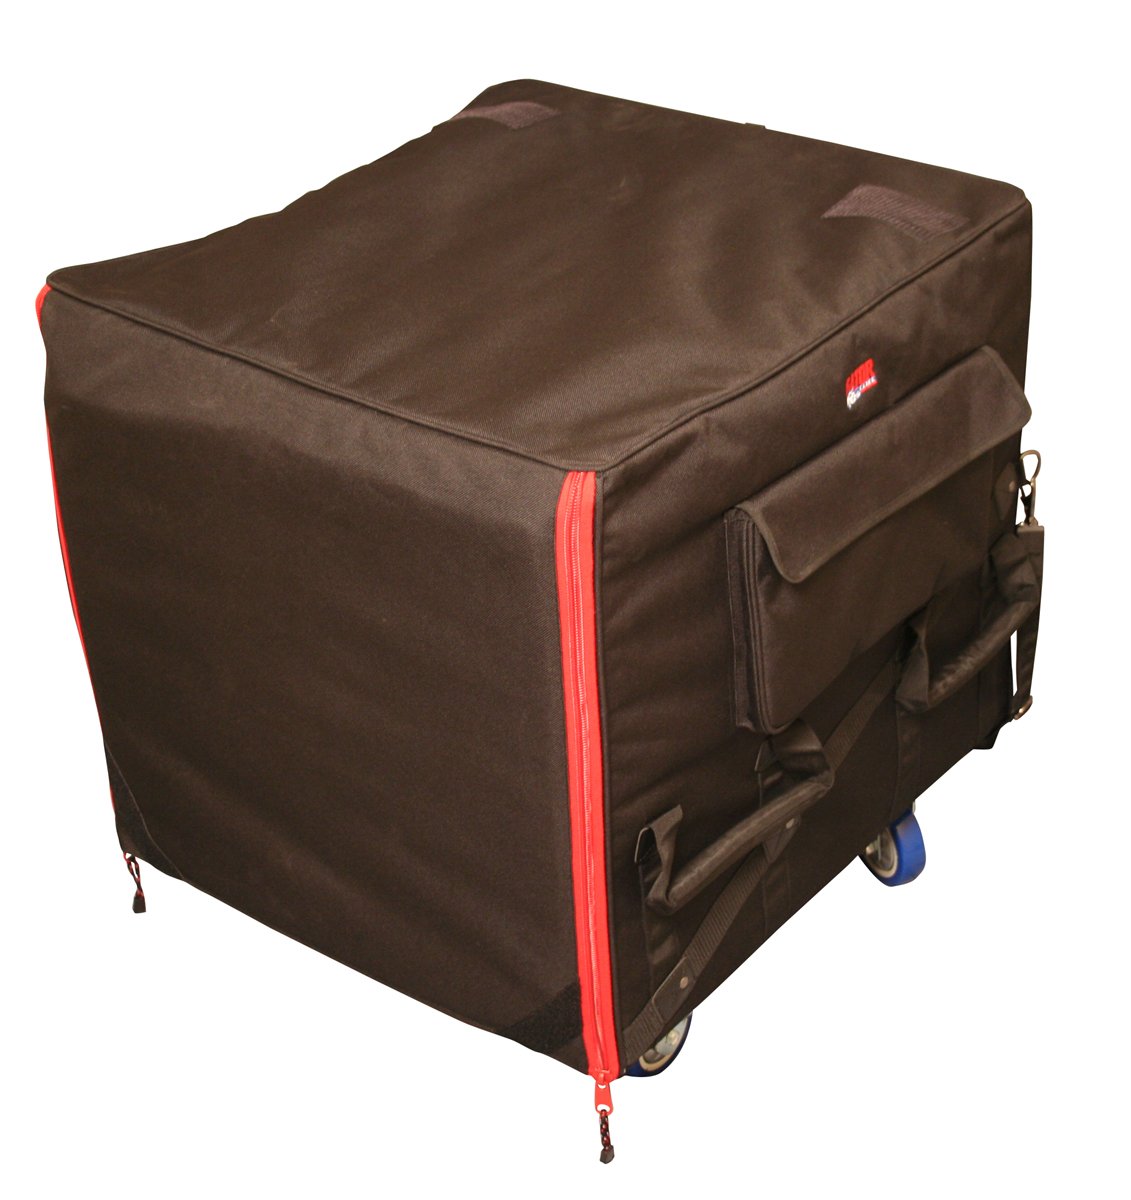 Sub Woofer Nylon Bag w/ Built-In Casters; Fits Subs By Cerwin Vega, JBL, Mackie & Many More